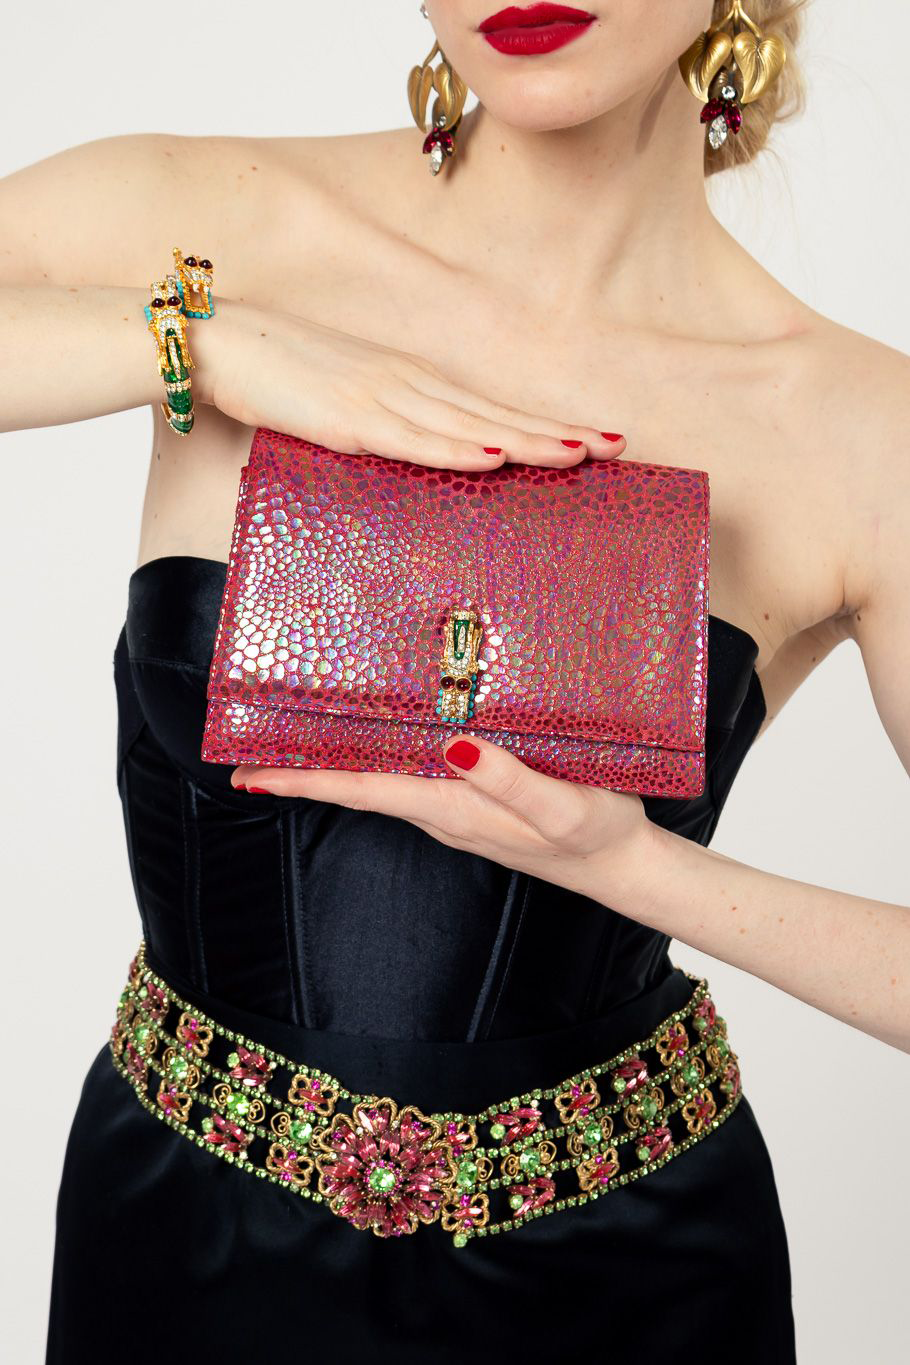 Clutch bag by Kenneth Jay Lane on white background held by model  @recessla